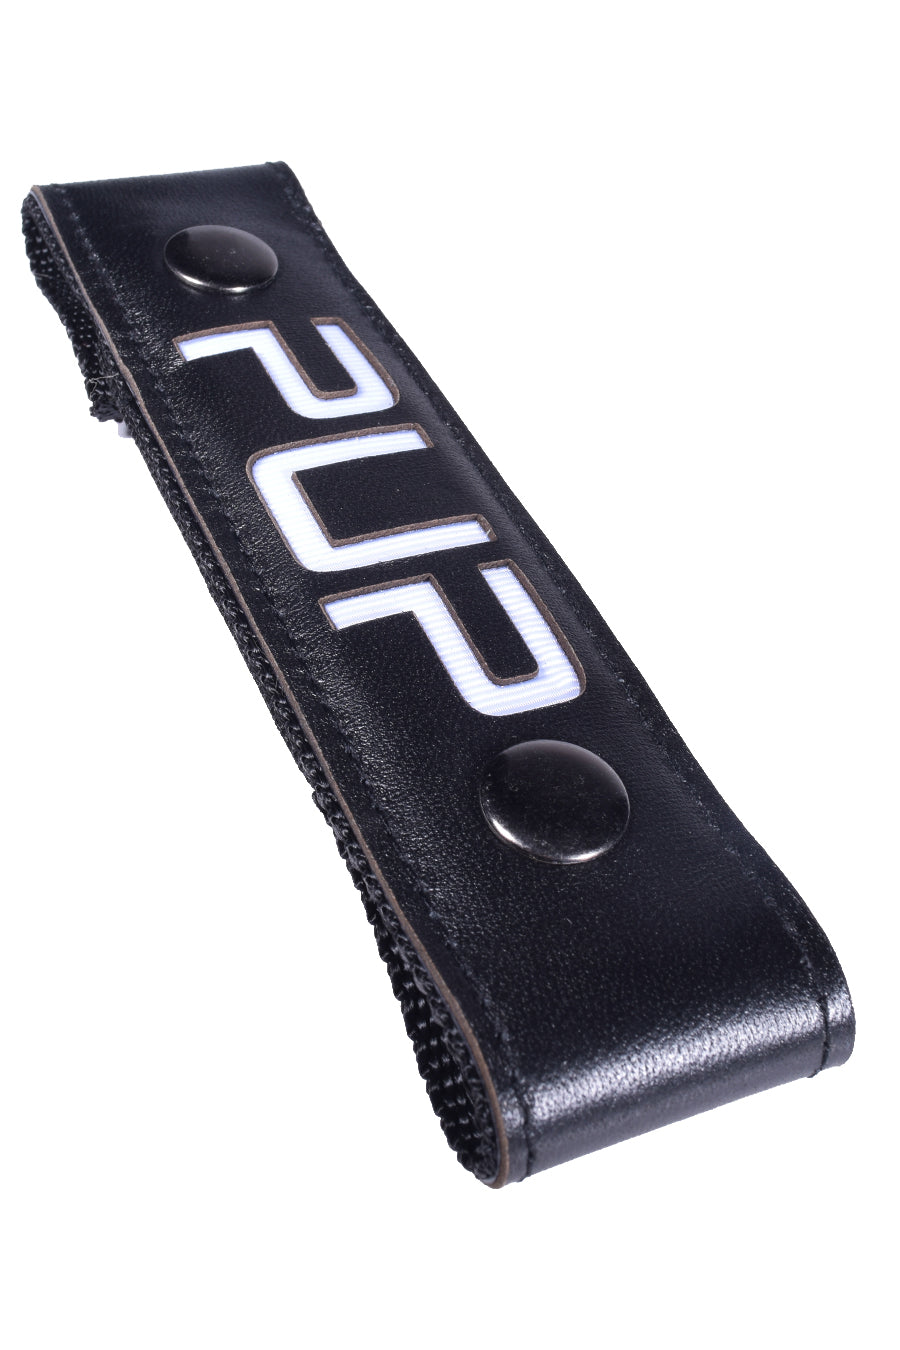 GLOW CENTER STRAP- PUP - DealByEthan.gay